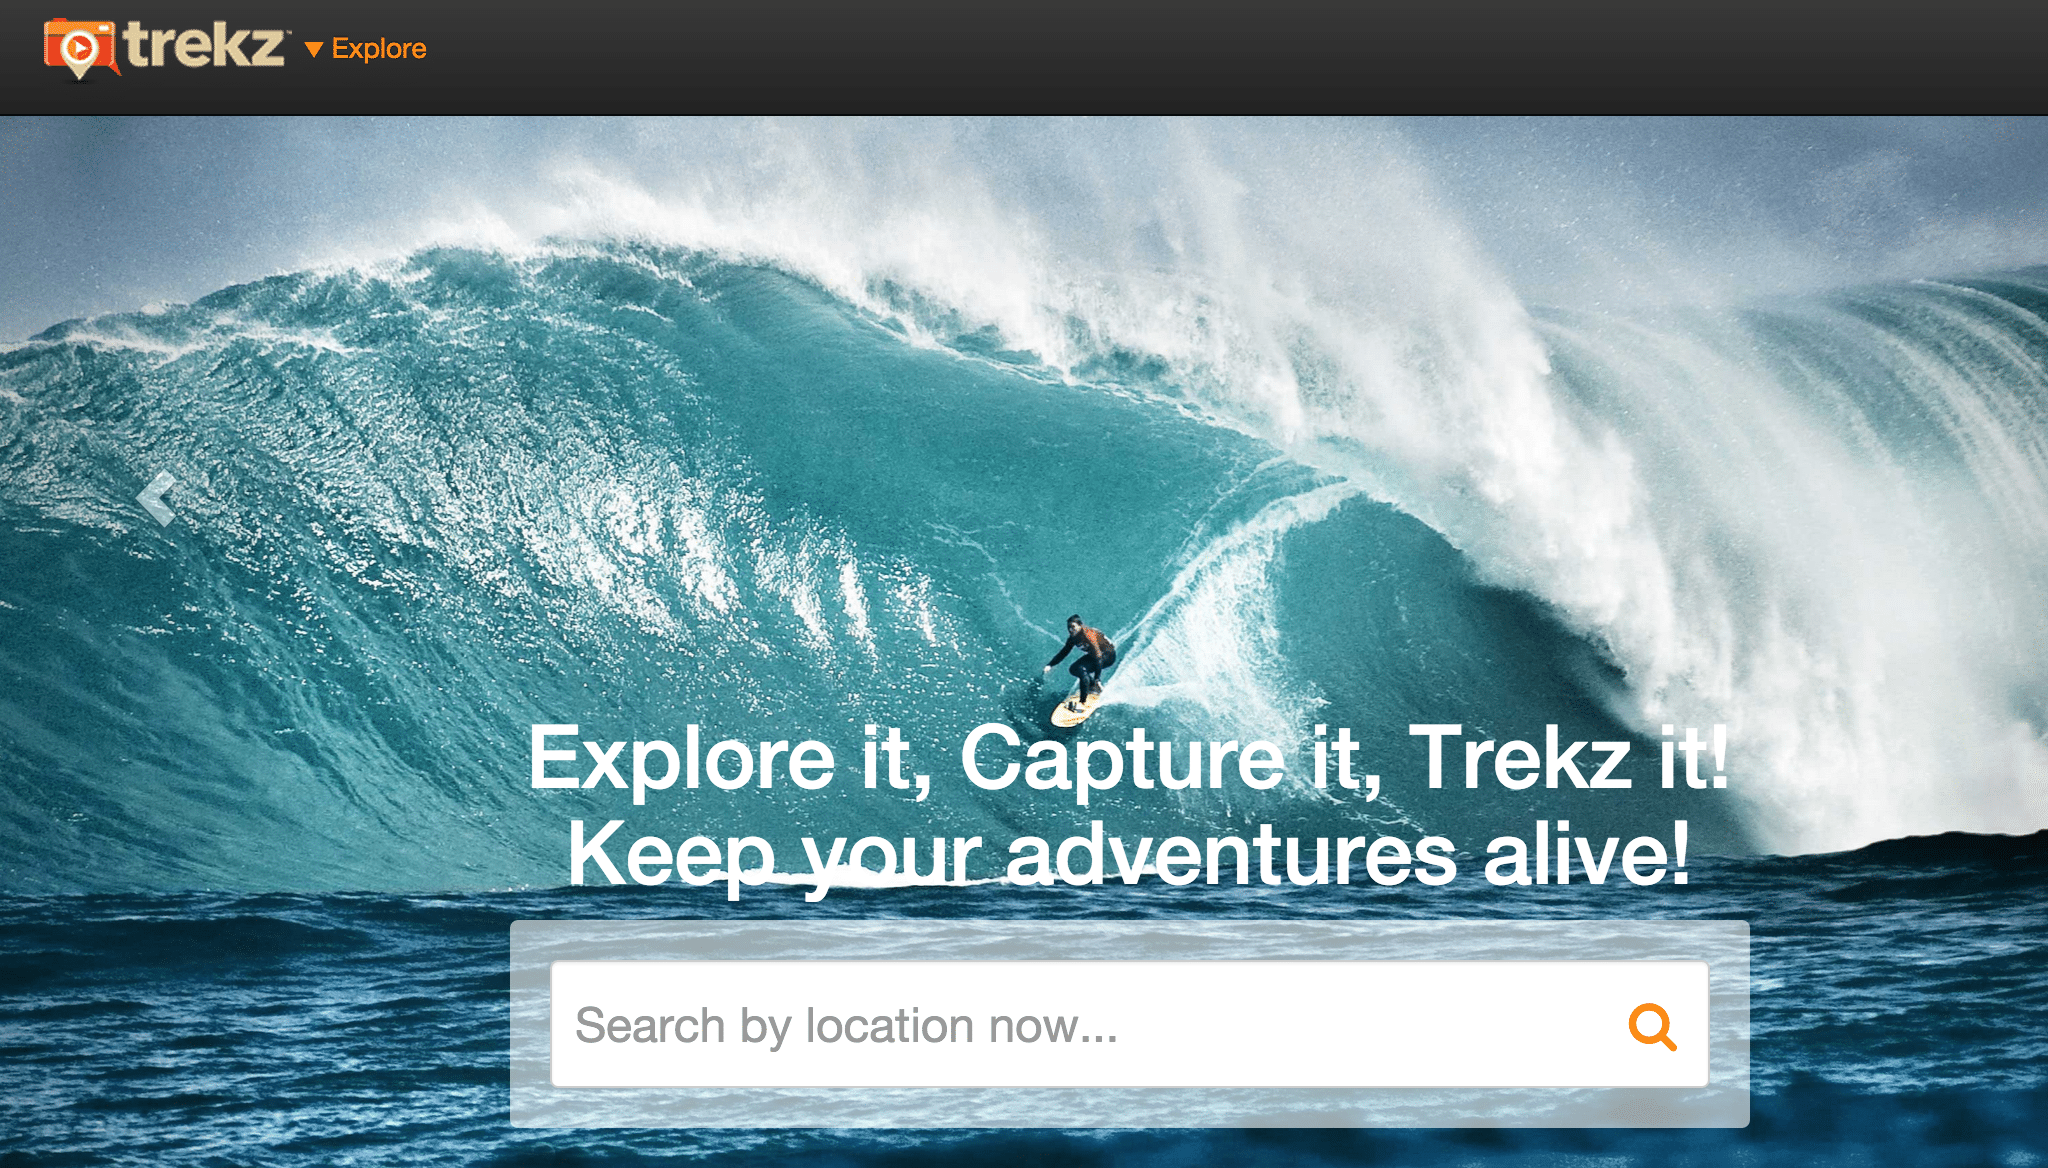 Trekz is a niche social community that crowdsources outdoor adventures and specifically where they took place.